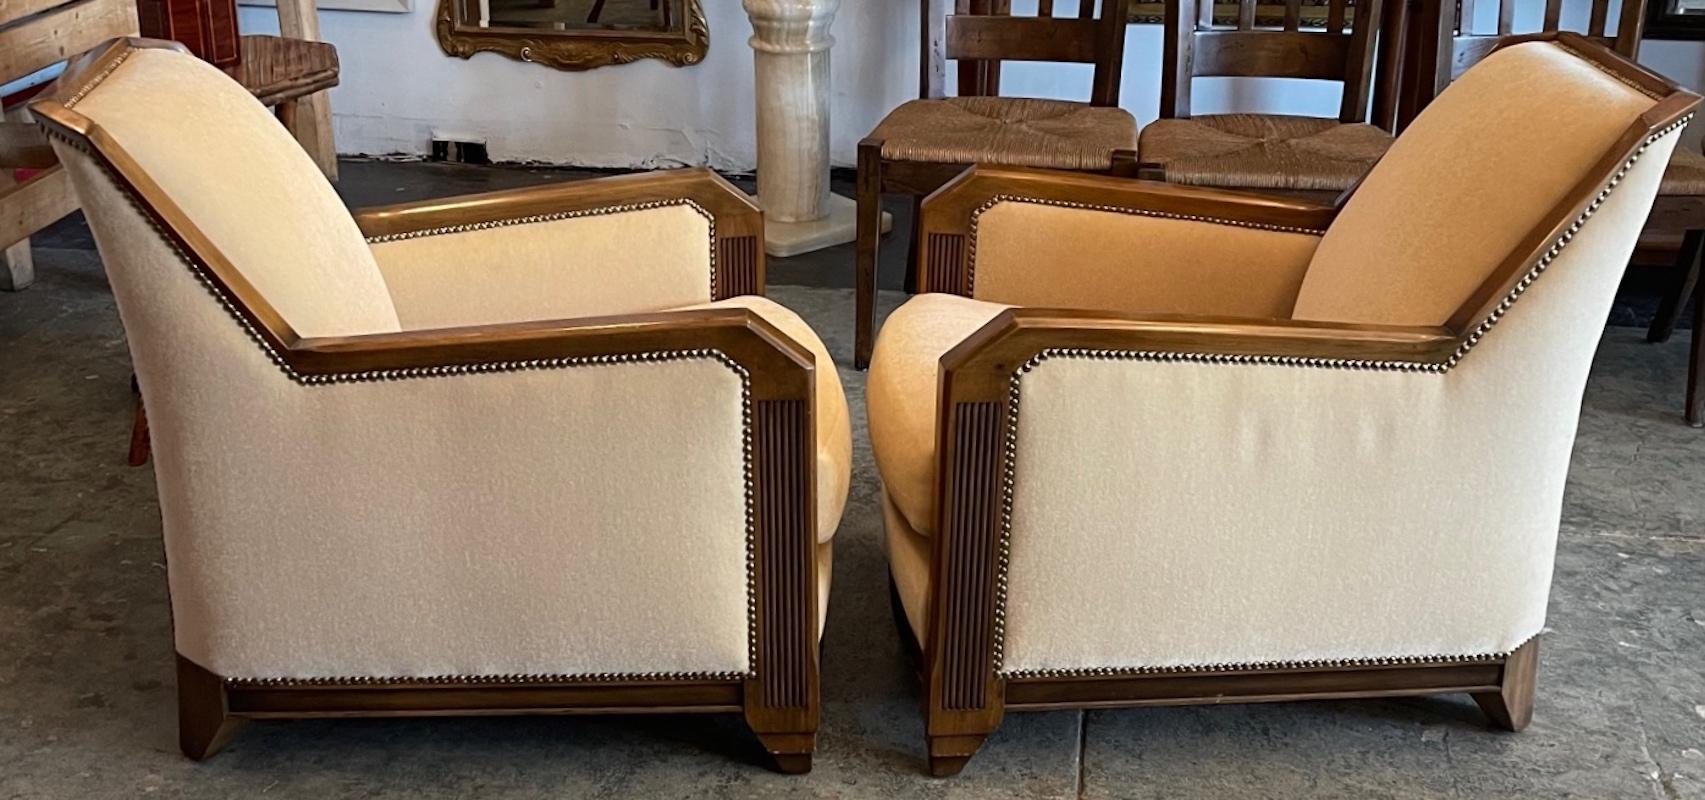 Here is a beautiful pair of art deco armchairs, They are upholstered in the original yellow silk mohair with metal studs. The frame is made of solid walnut.